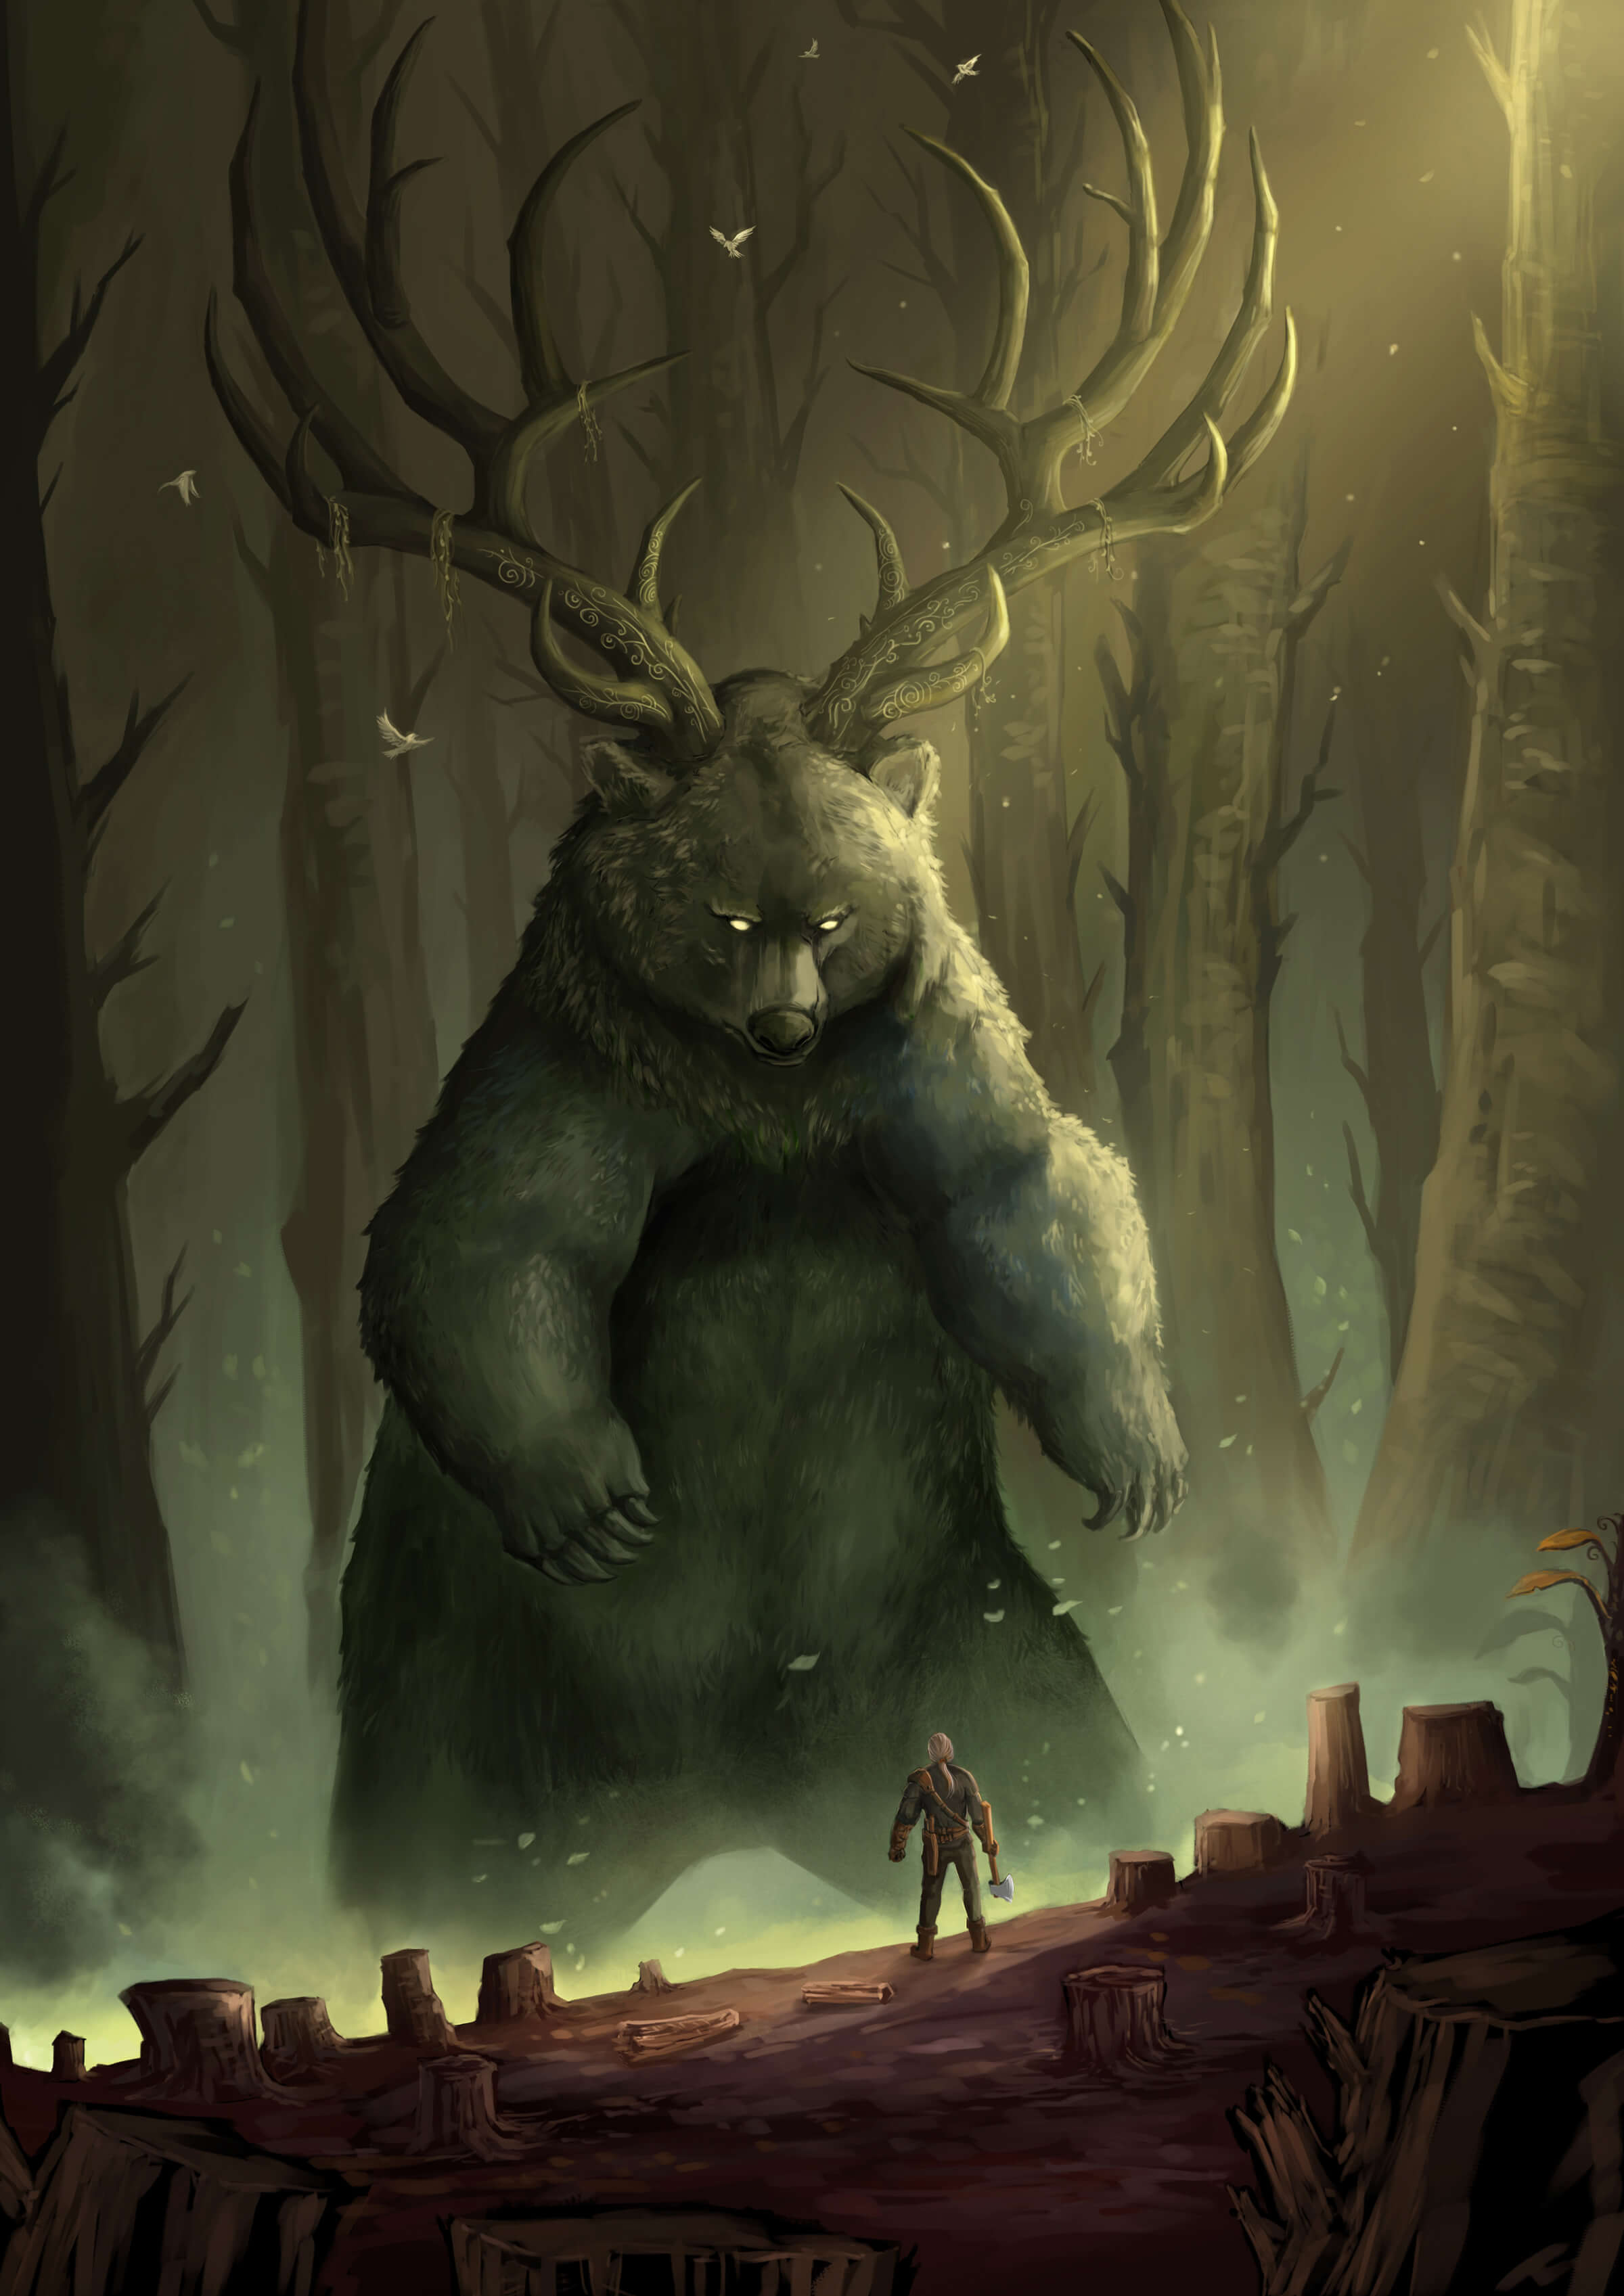 A man with an ax surrounded by tree stumps stands before an enormous upright bear with massive antlers in a dimly lit glade.